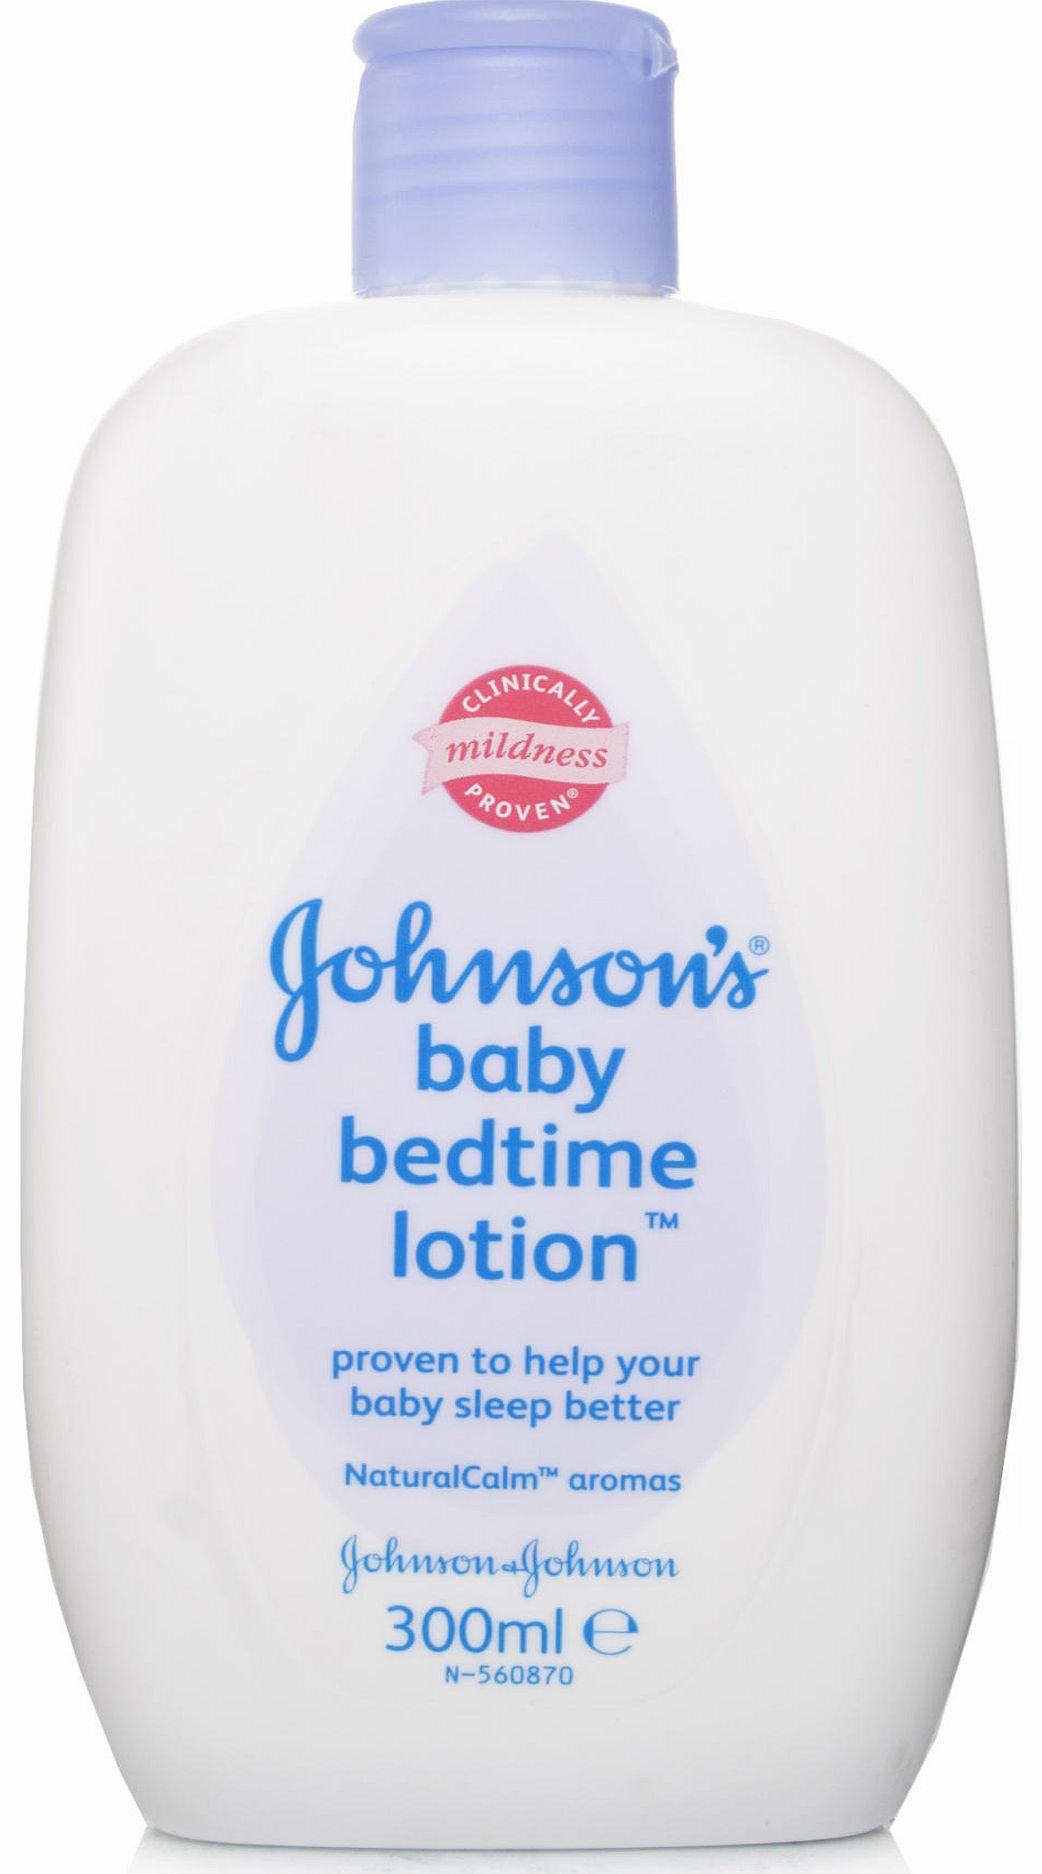 Johnsons Baby Bedtime Lotion - This soothing body lotion is formulated with Natural calm essences and aromas to soothe your baby before bedtime. Massage into babies skin after bath time to relax your baby and send them off to sleep naturally. Enriche